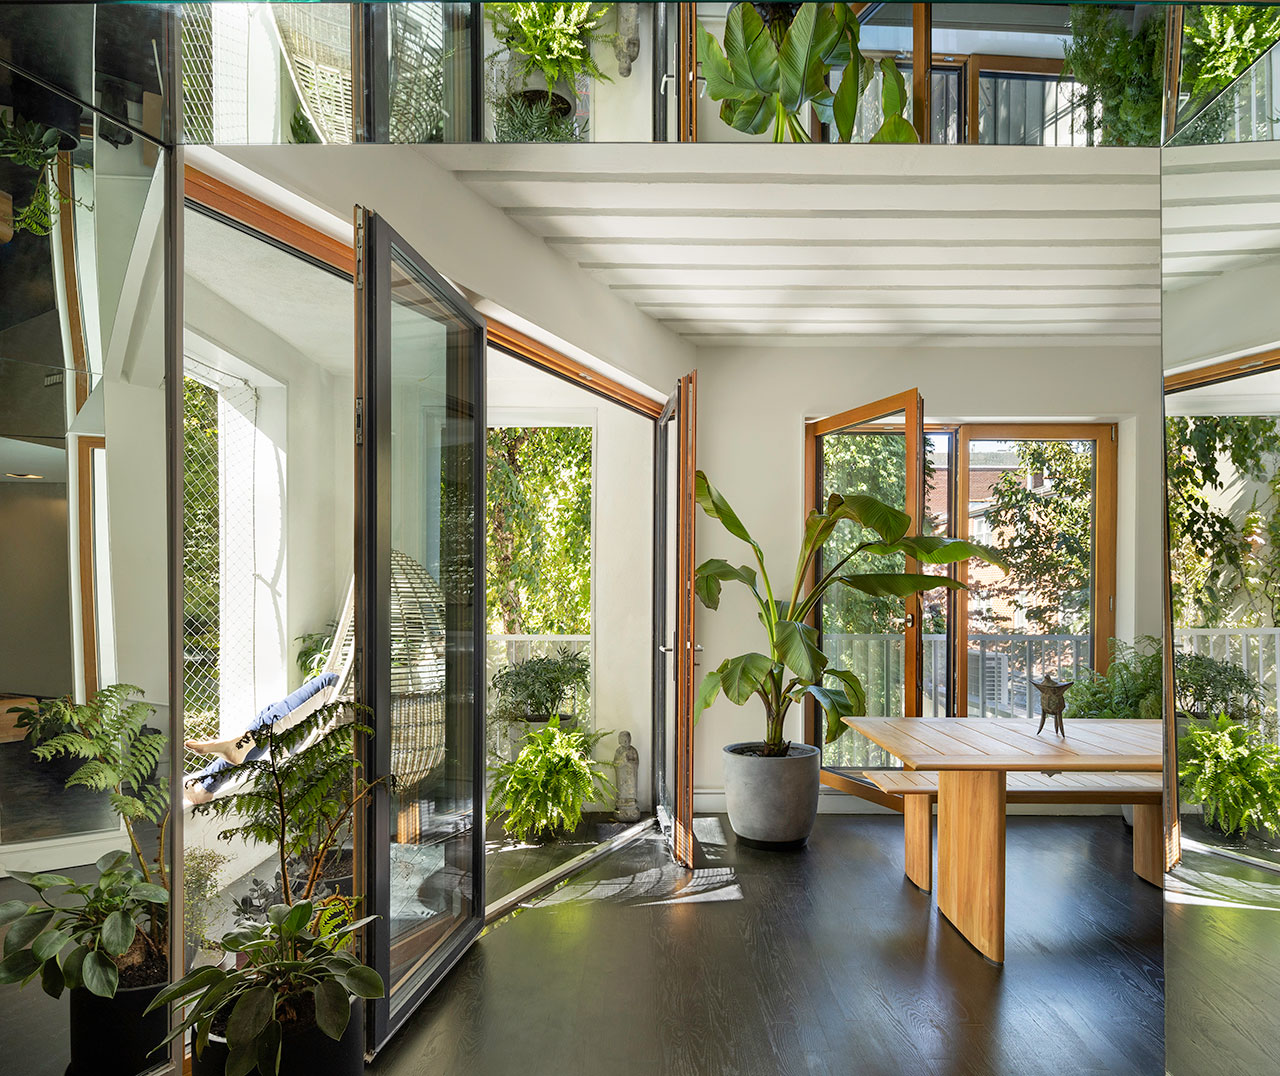 Mini Tower One Brings Nature Indoors in this Passive House in Brooklyn